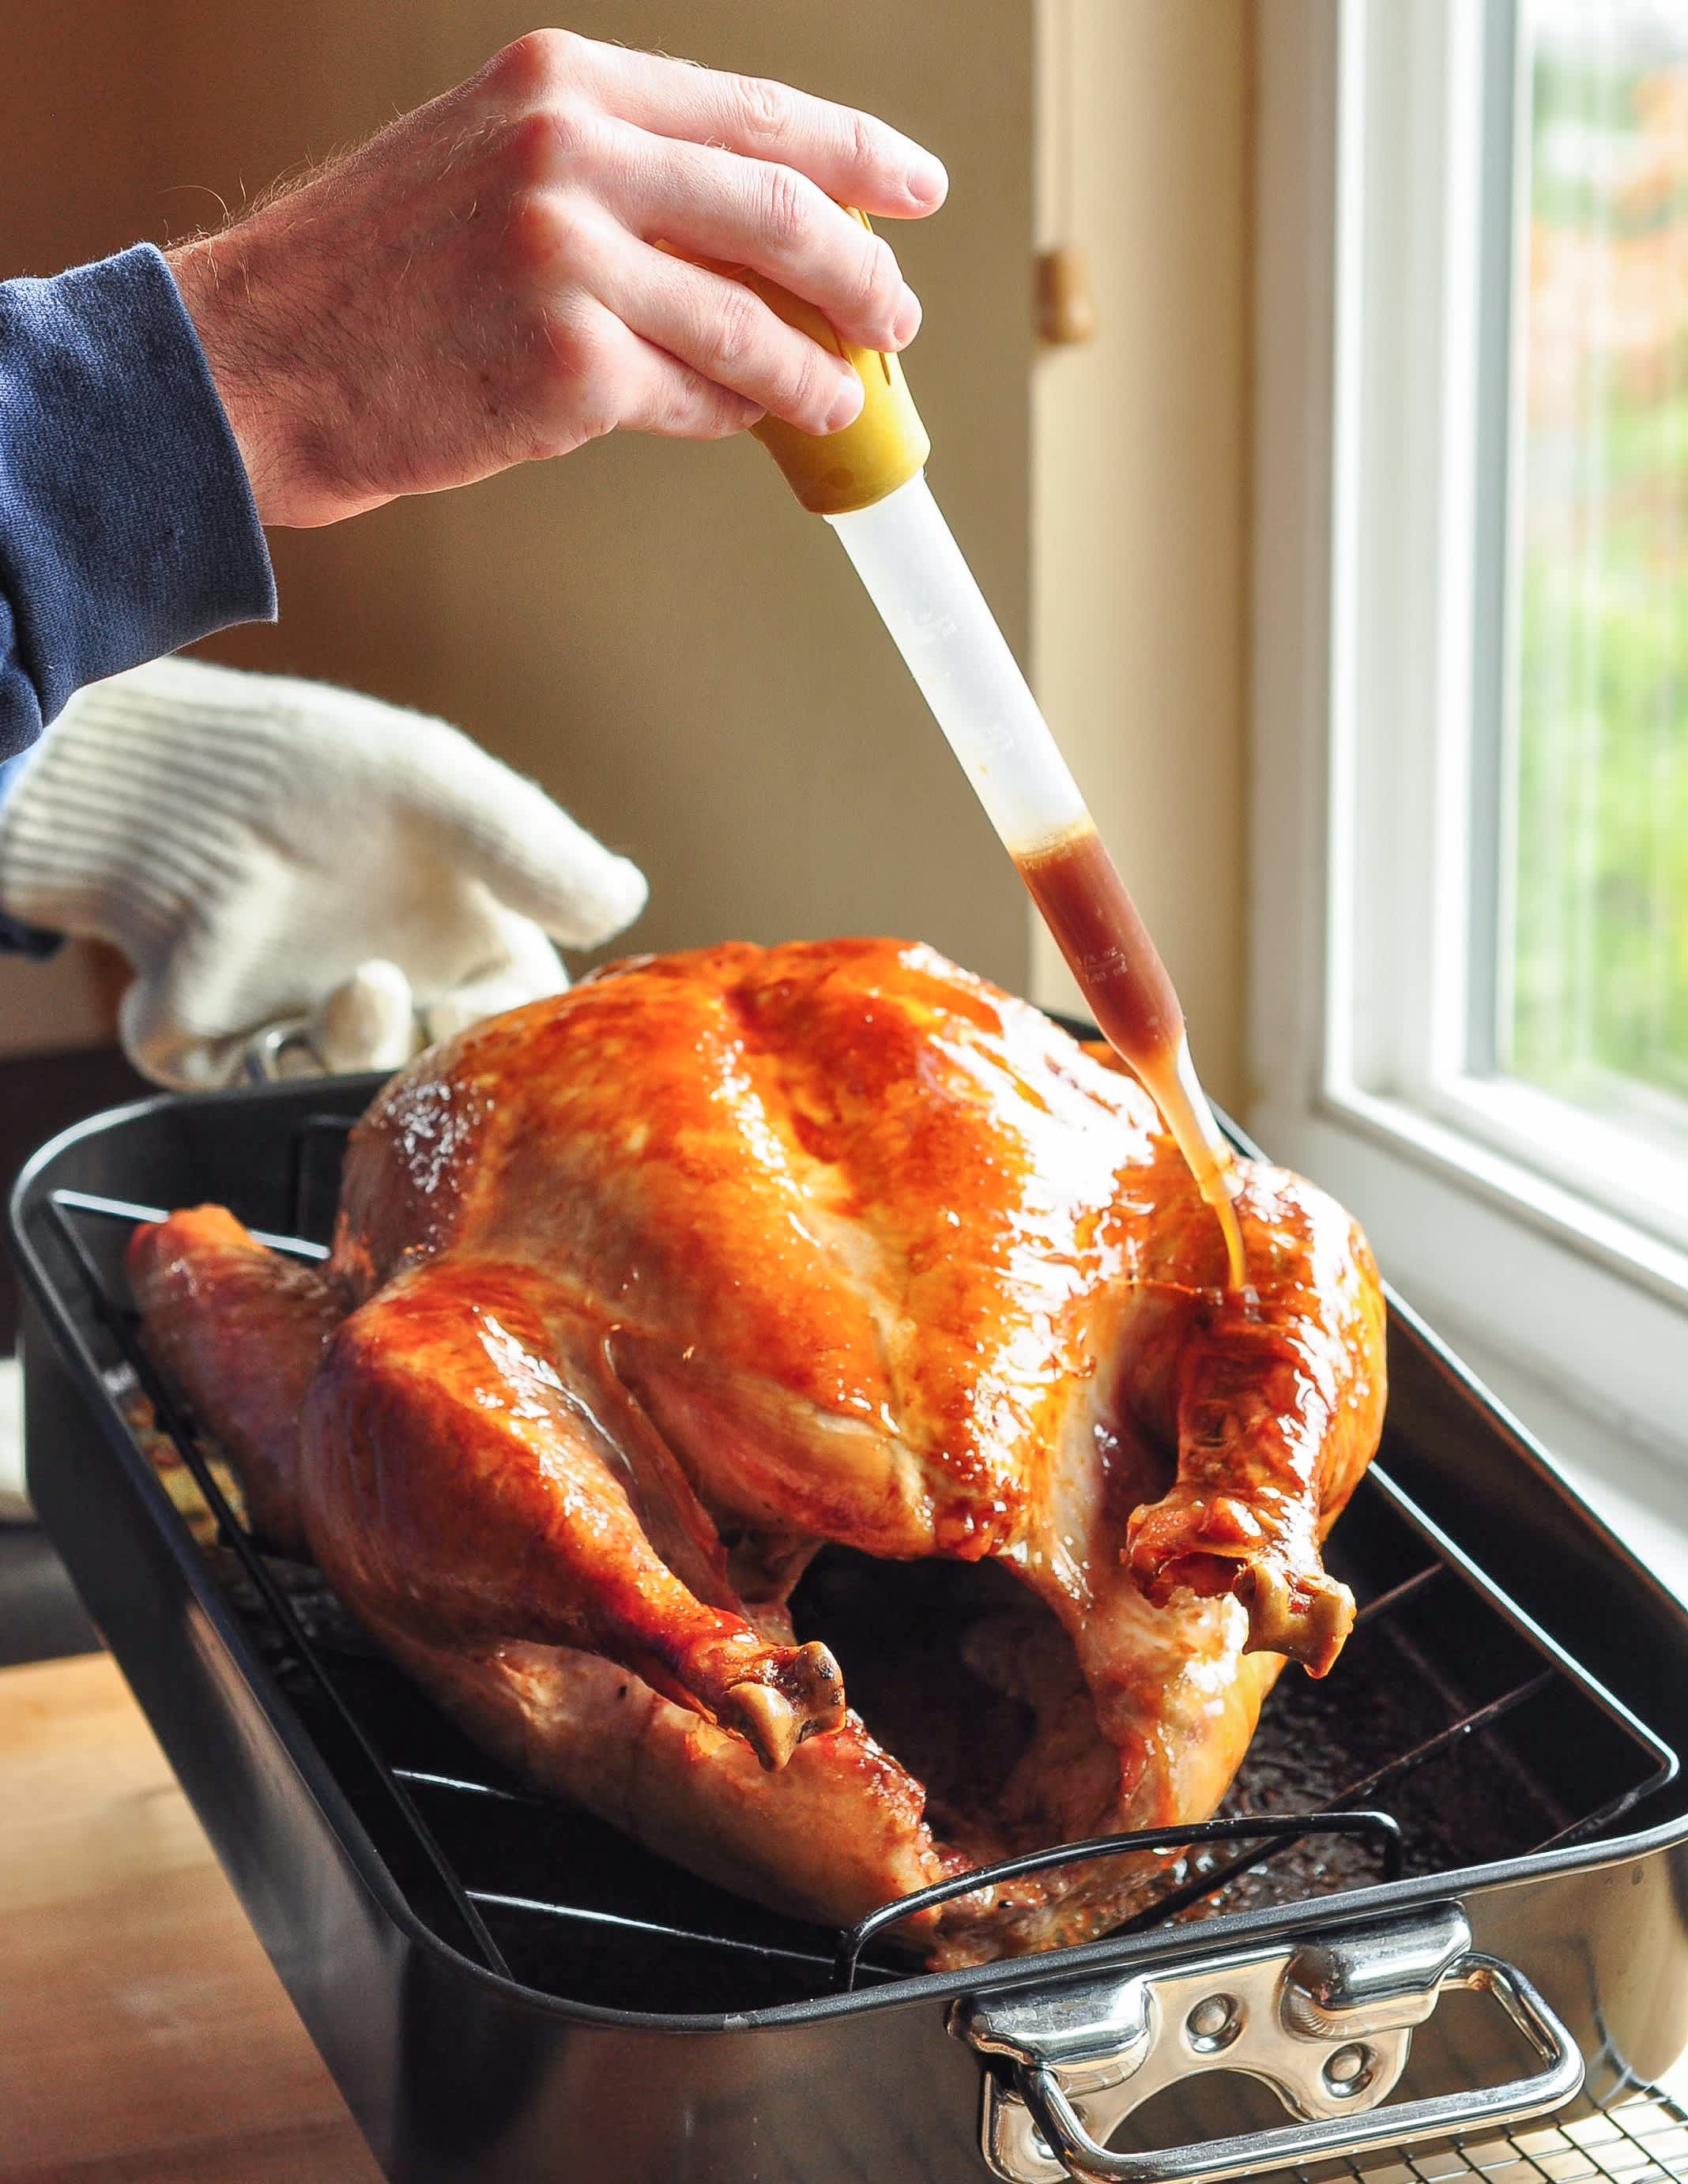 How To Cook a Turkey: The Simplest, Easiest Method | Kitchn